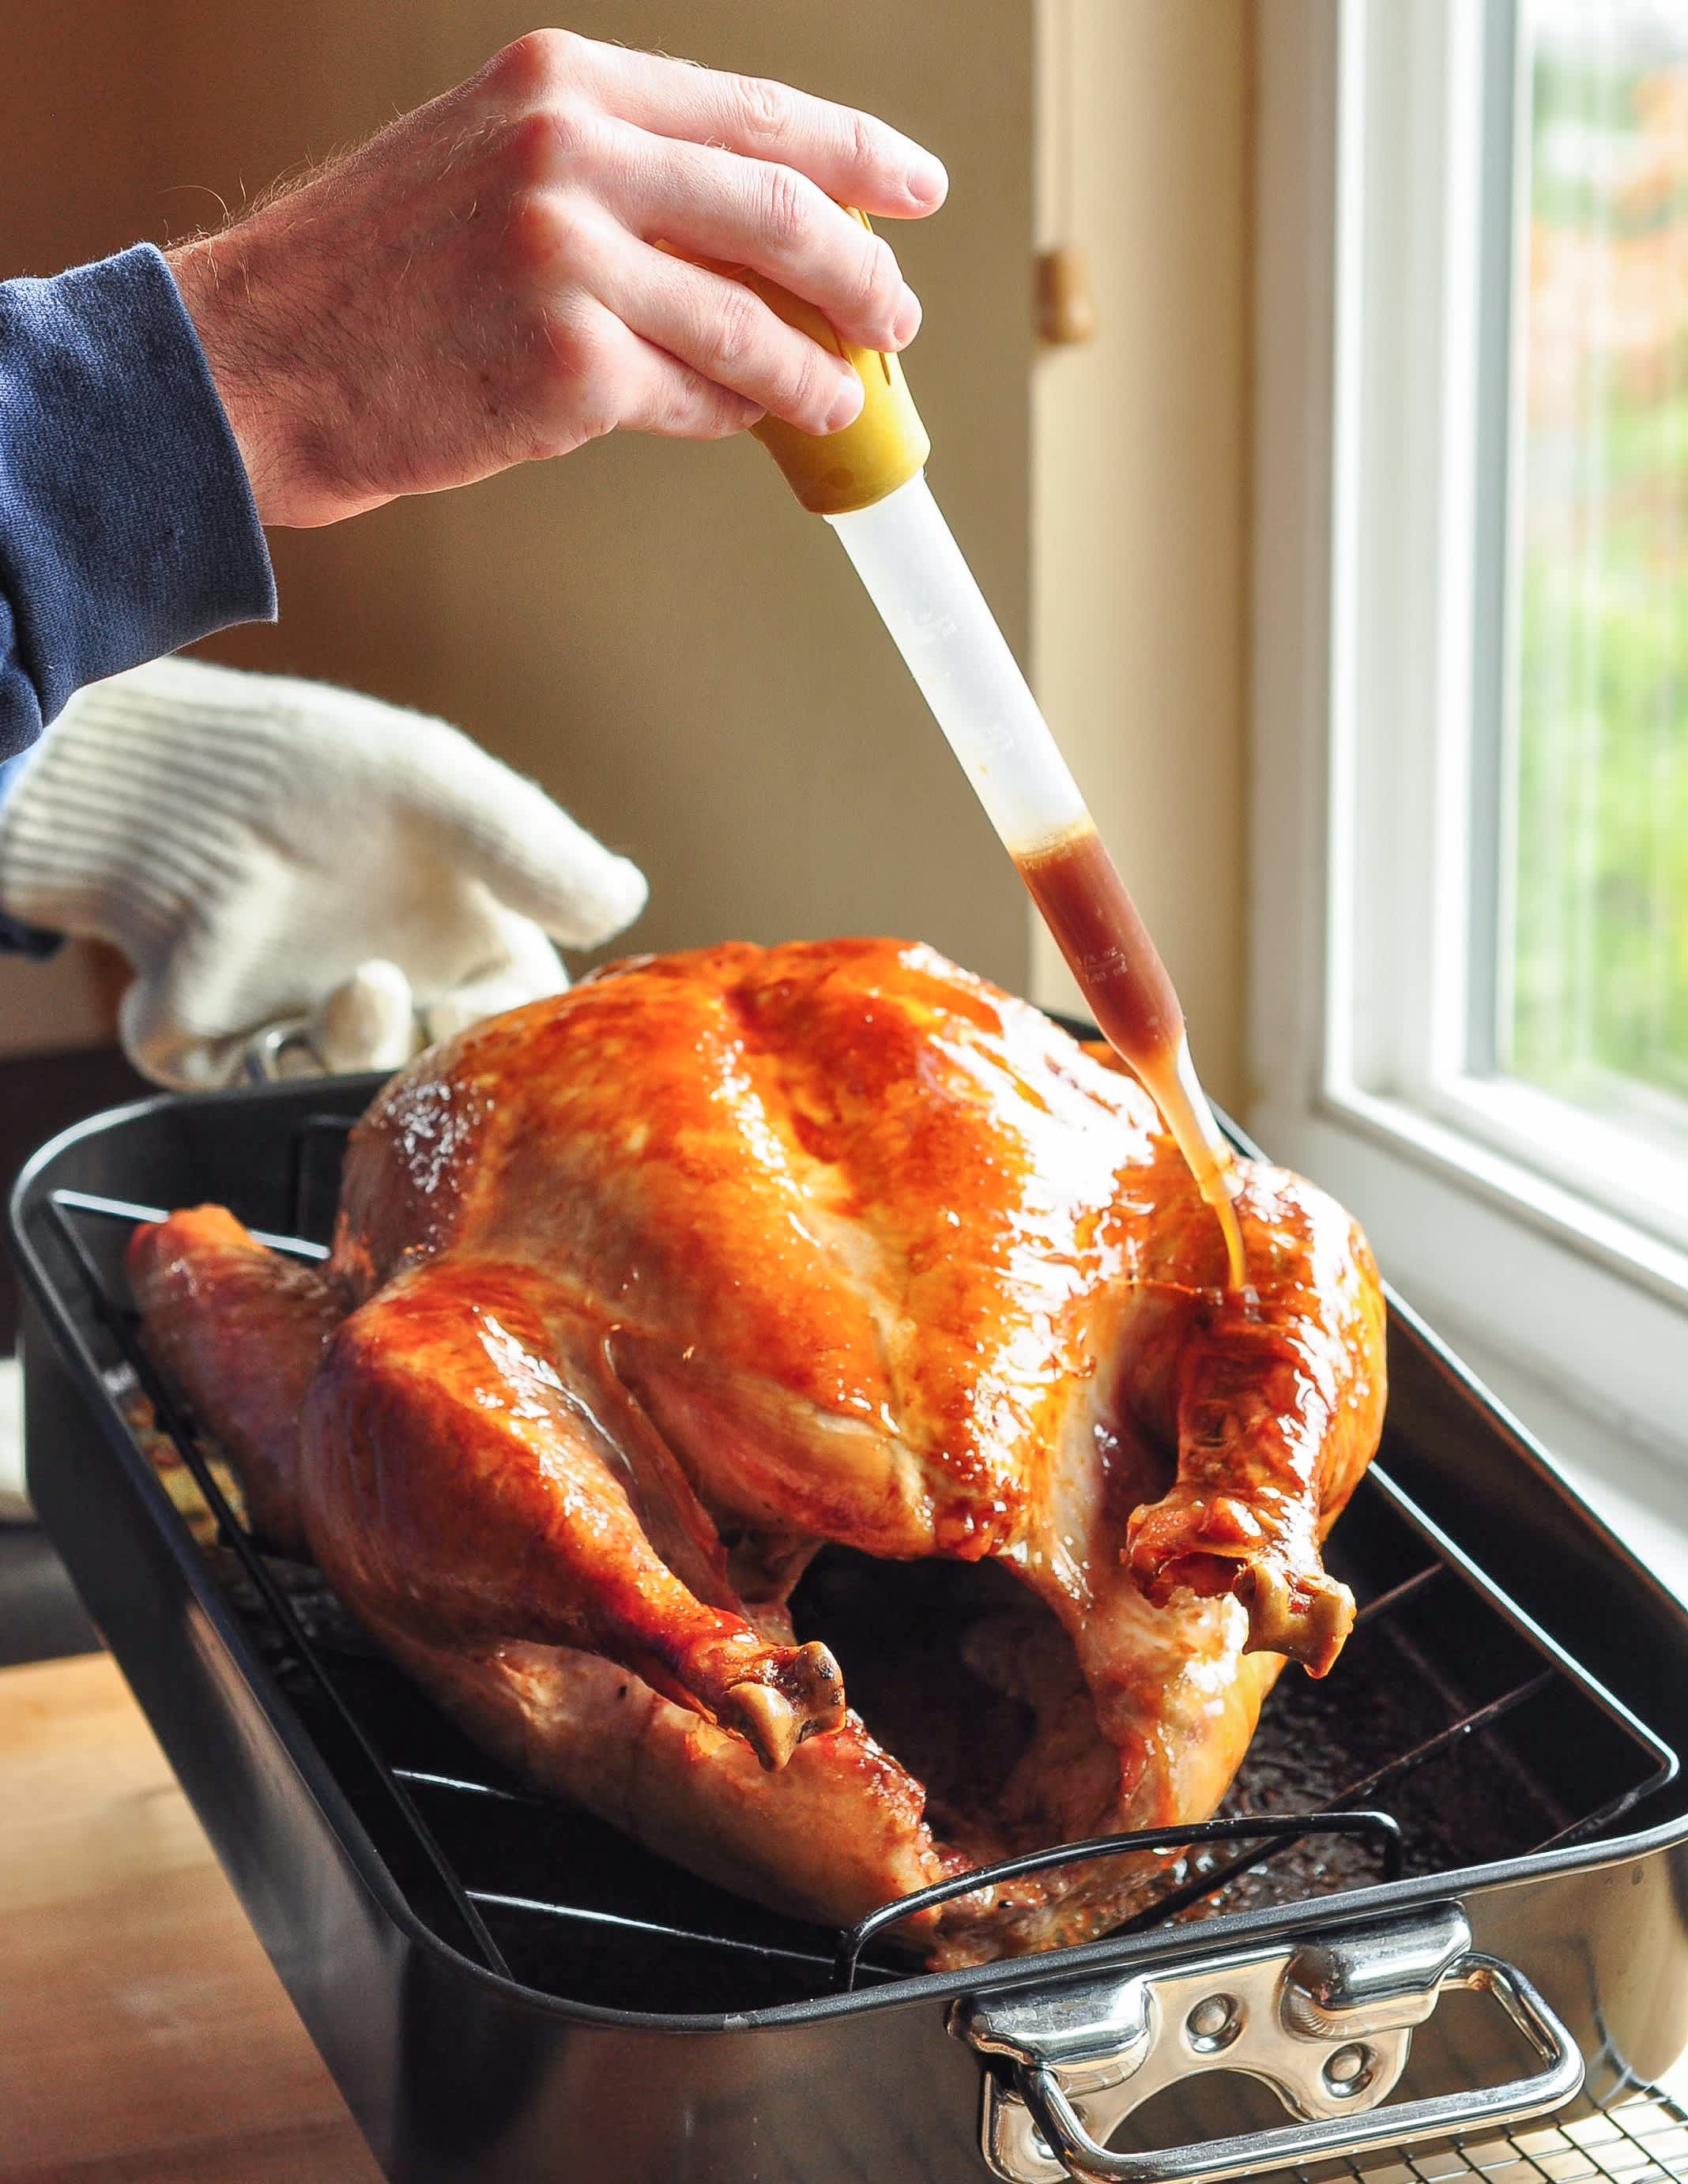 How To Cook a Turkey: The Simplest, Easiest Method | Kitchn